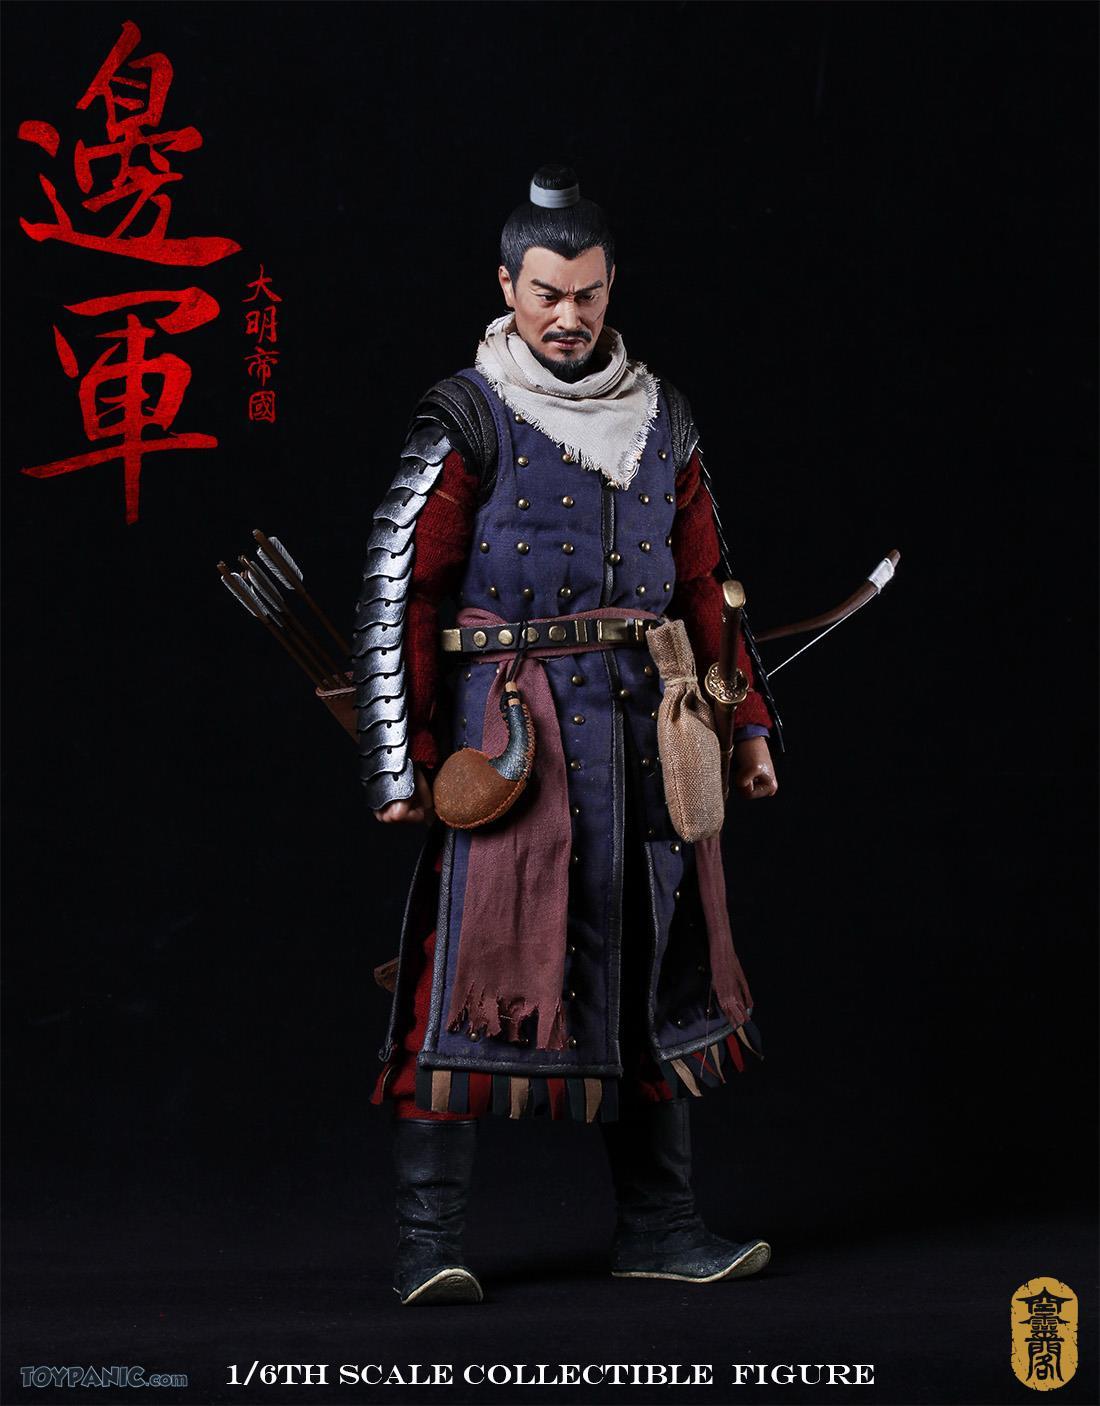 NEW PRODUCT: Sonder: 1/6 Song Dynasty Series-Yue Jiaxing Yang Zaixing Action Figure (SD005#) 1223201650535PM_35